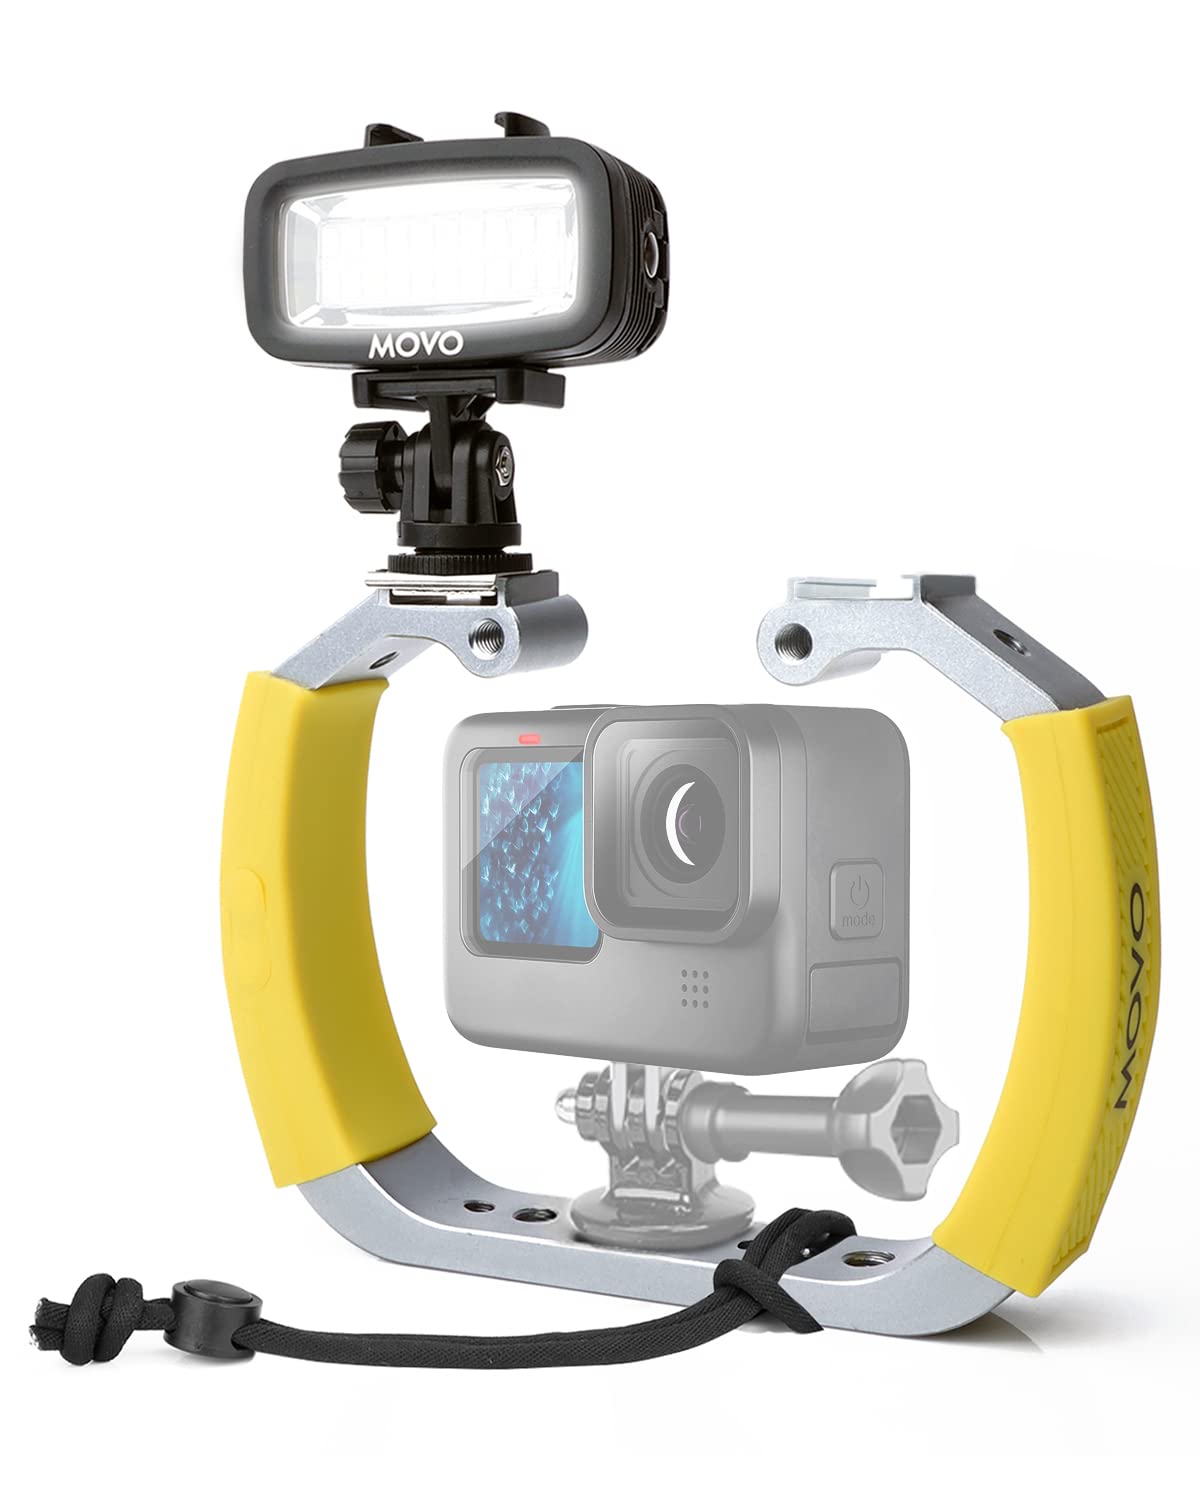 Movo DiveRig4 Diving Rig Bundle with Waterproof LED Light - Compatible with GoPro HERO3, HERO4, HERO5, HERO6, HERO7, HERO8, and DJI Osmo Action Cam - Scuba Accessories for Underwater Camera  - Acceptable